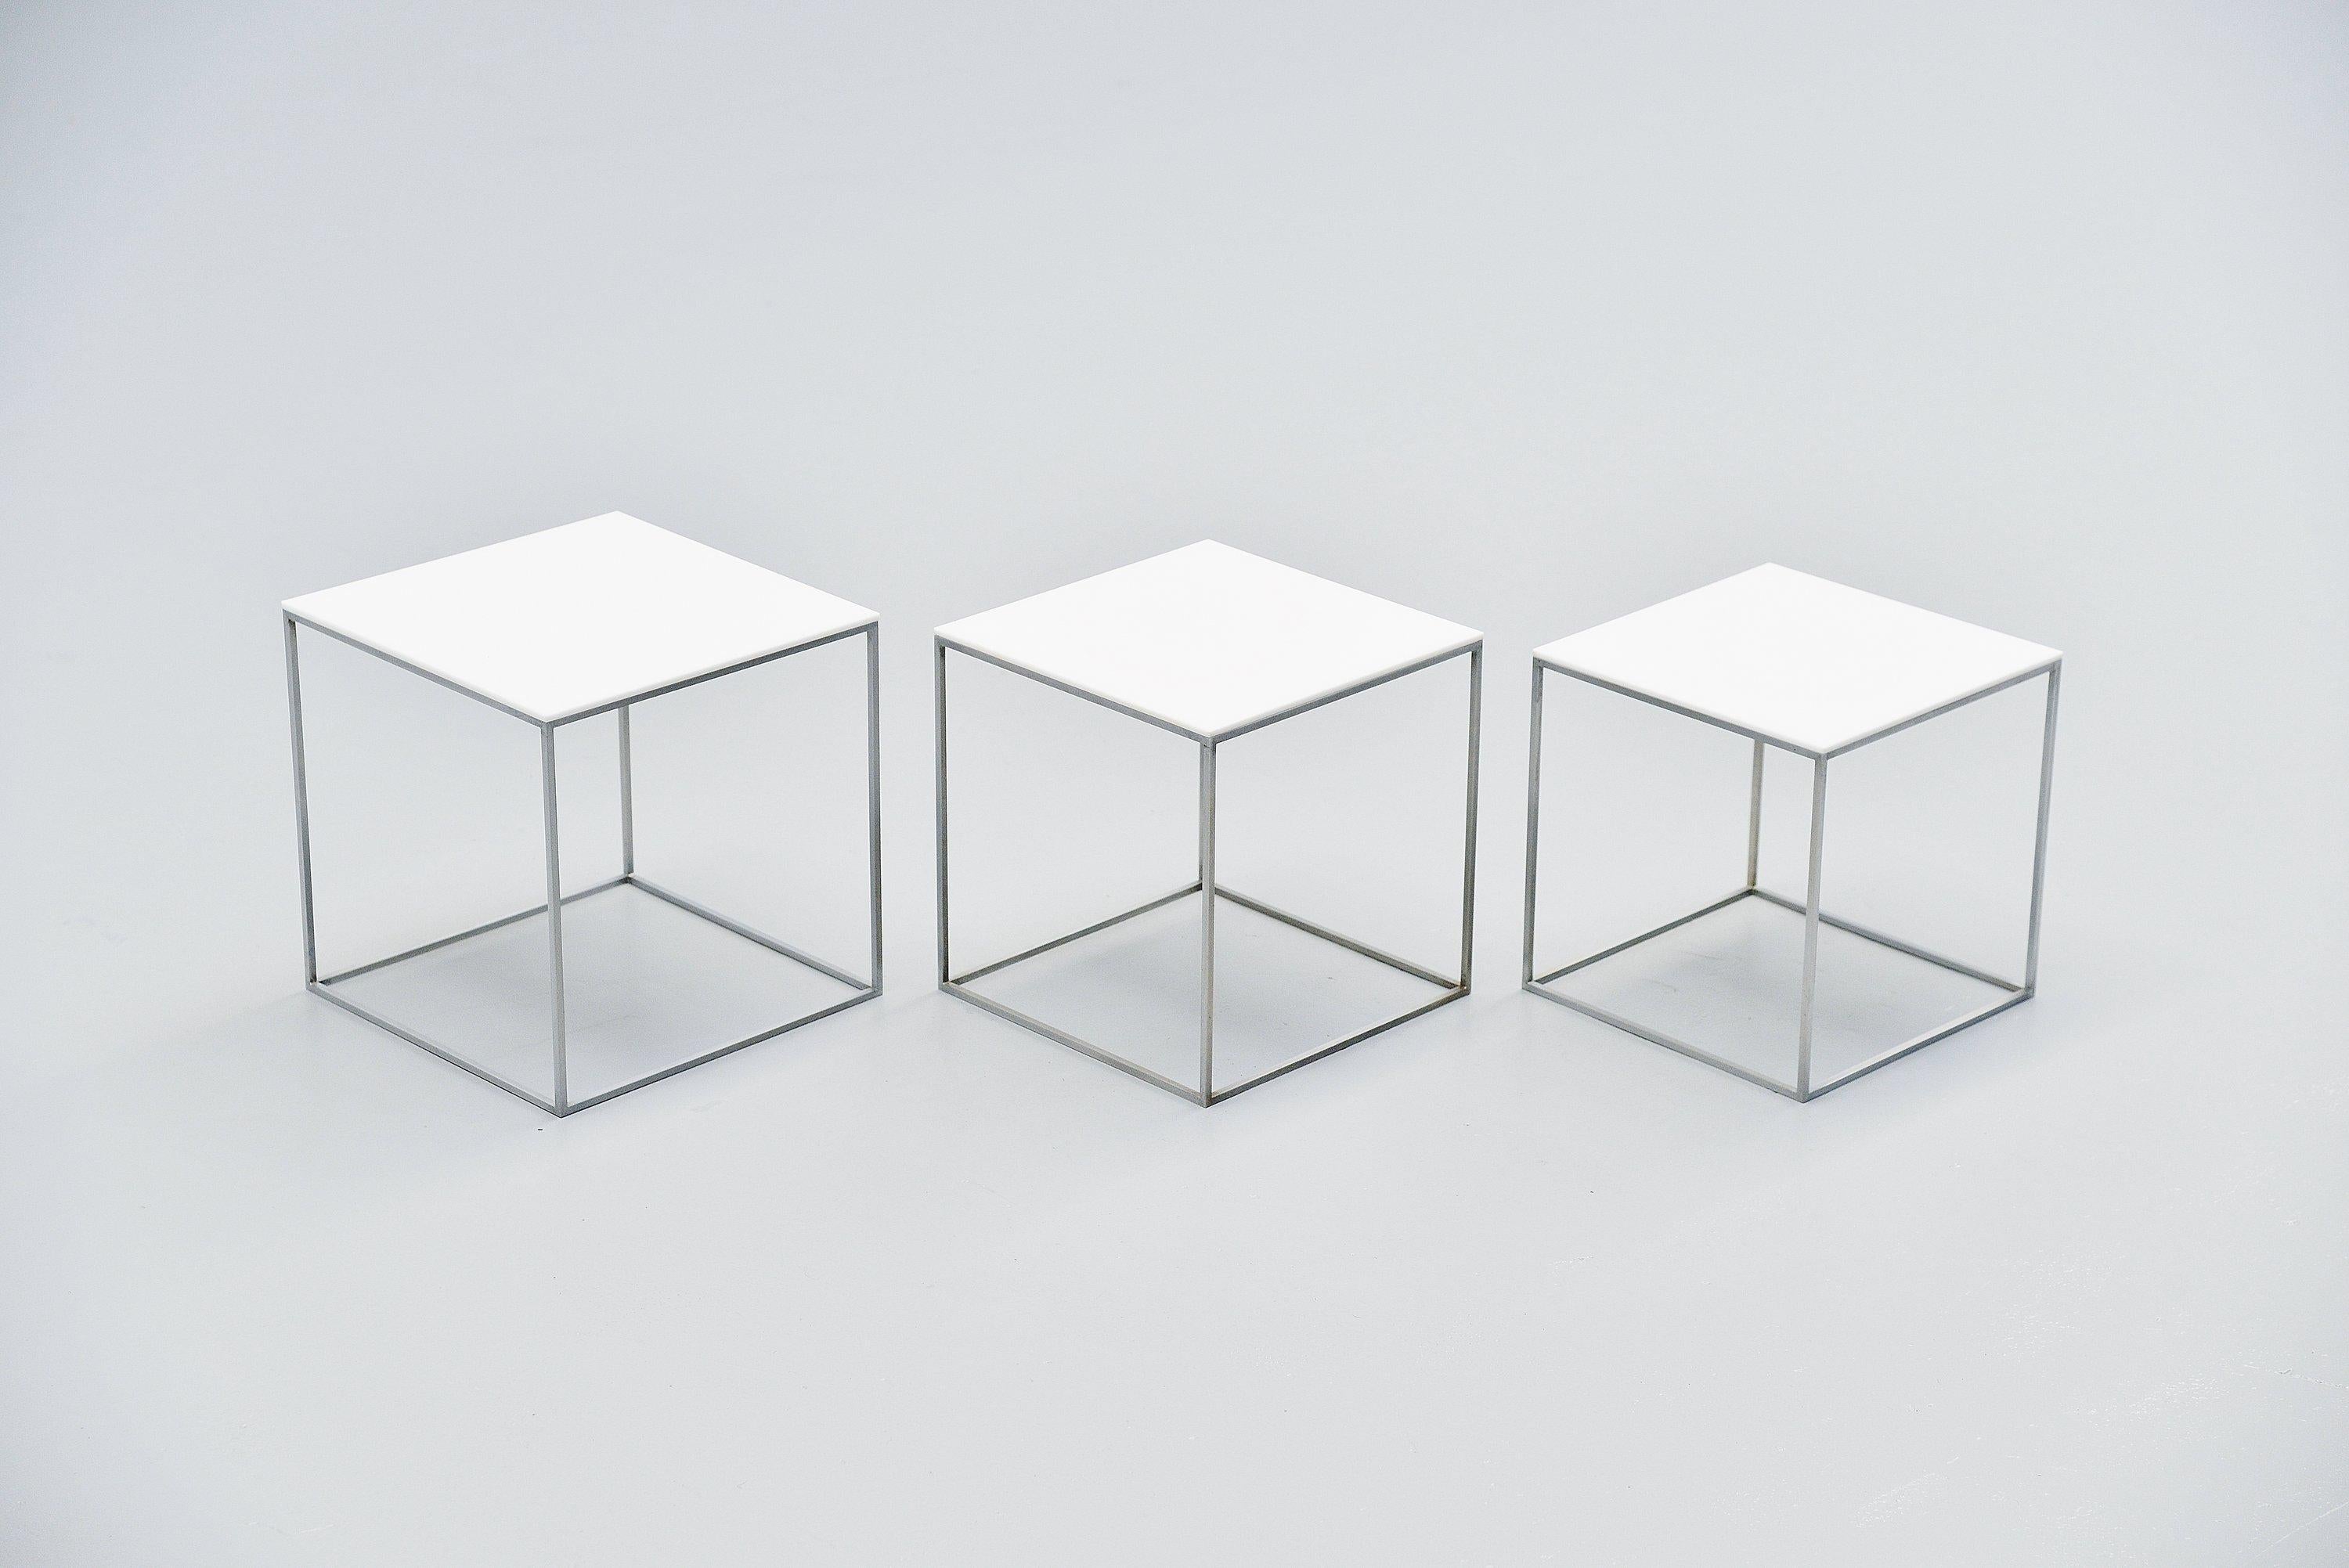 Early set of PK71 nesting tables designed by Poul Kjaerholm and manufactured by Ejvind Kold Christensen, Denmark, 1957. These Minimalist shaped nesting tables have a stainless steel frame and white polished Perspex tops. The tables are in good